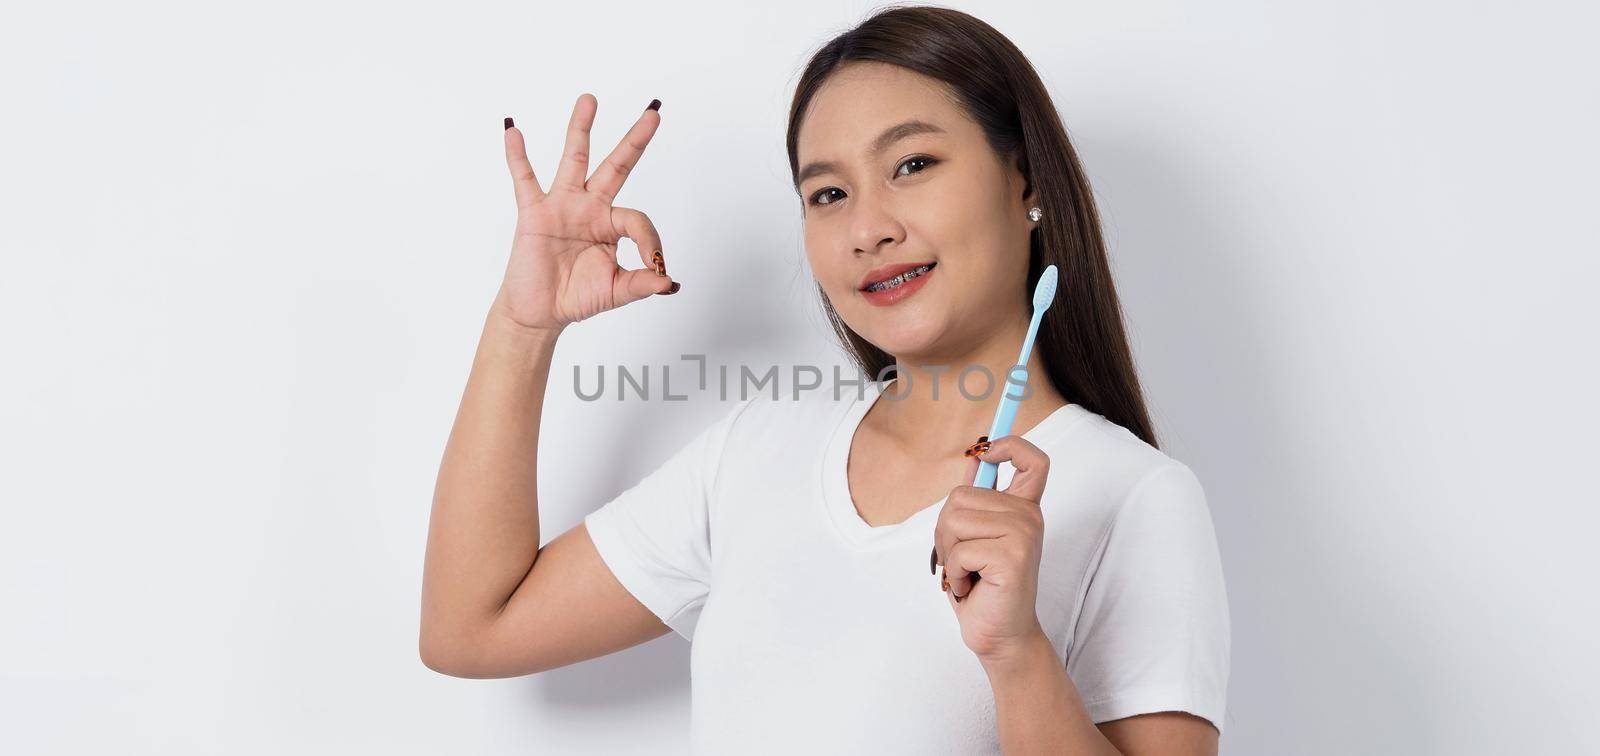 Asian teen facial with braces and toothbrush smiling to camera  by gnepphoto